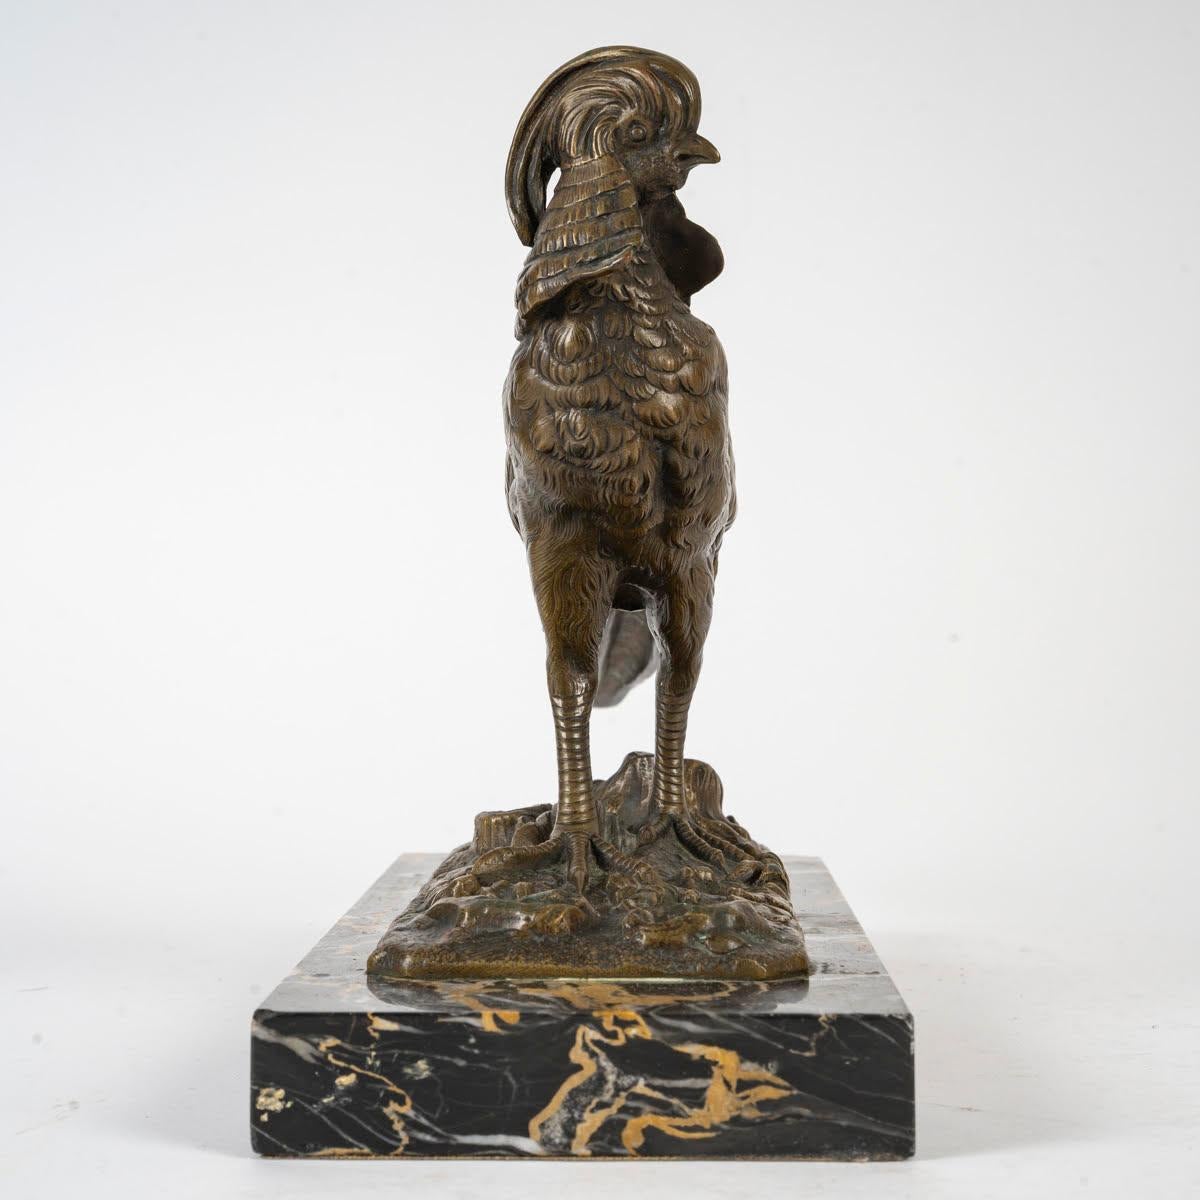 20th Century Sculpture in Patinated Bronze, Animal Statue Representing a Pheasant, 1920-1930. For Sale